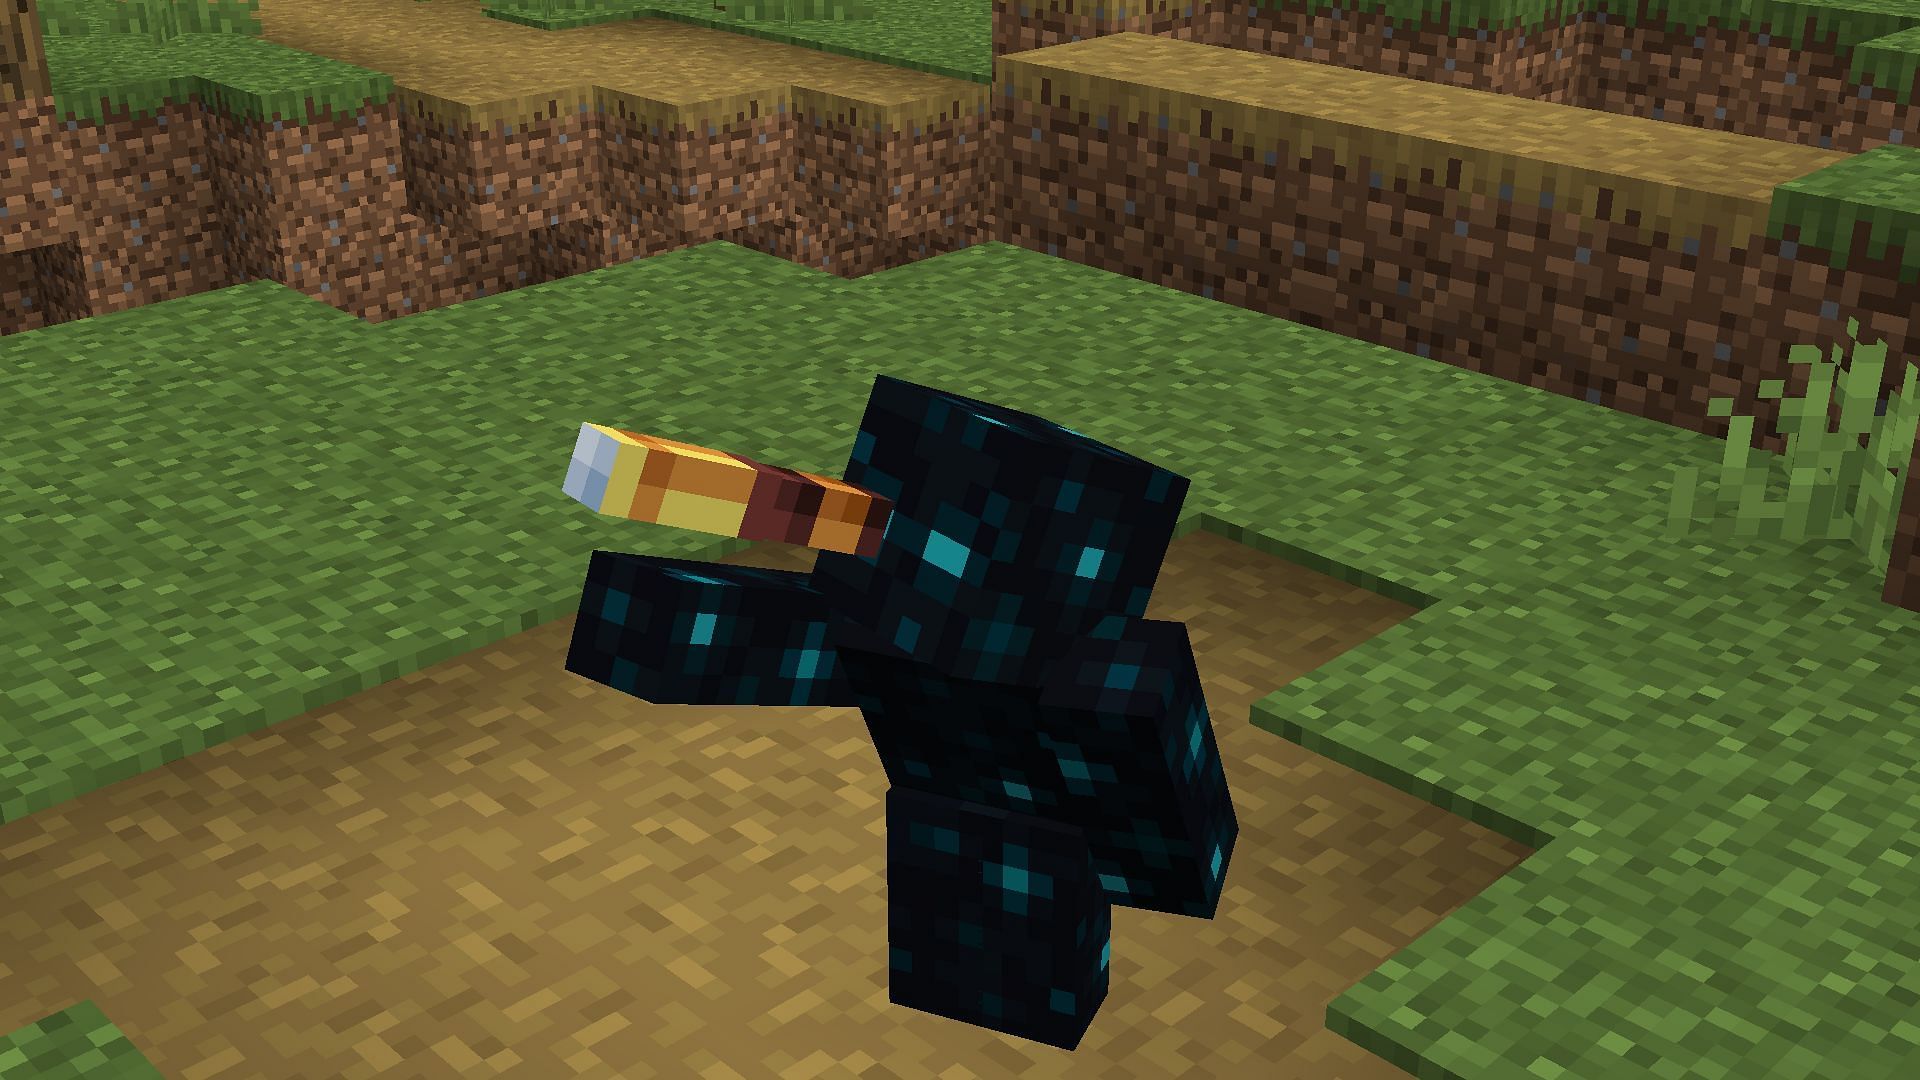 Players can use a spyglass to look at distant world terrain (Image via Mojang)